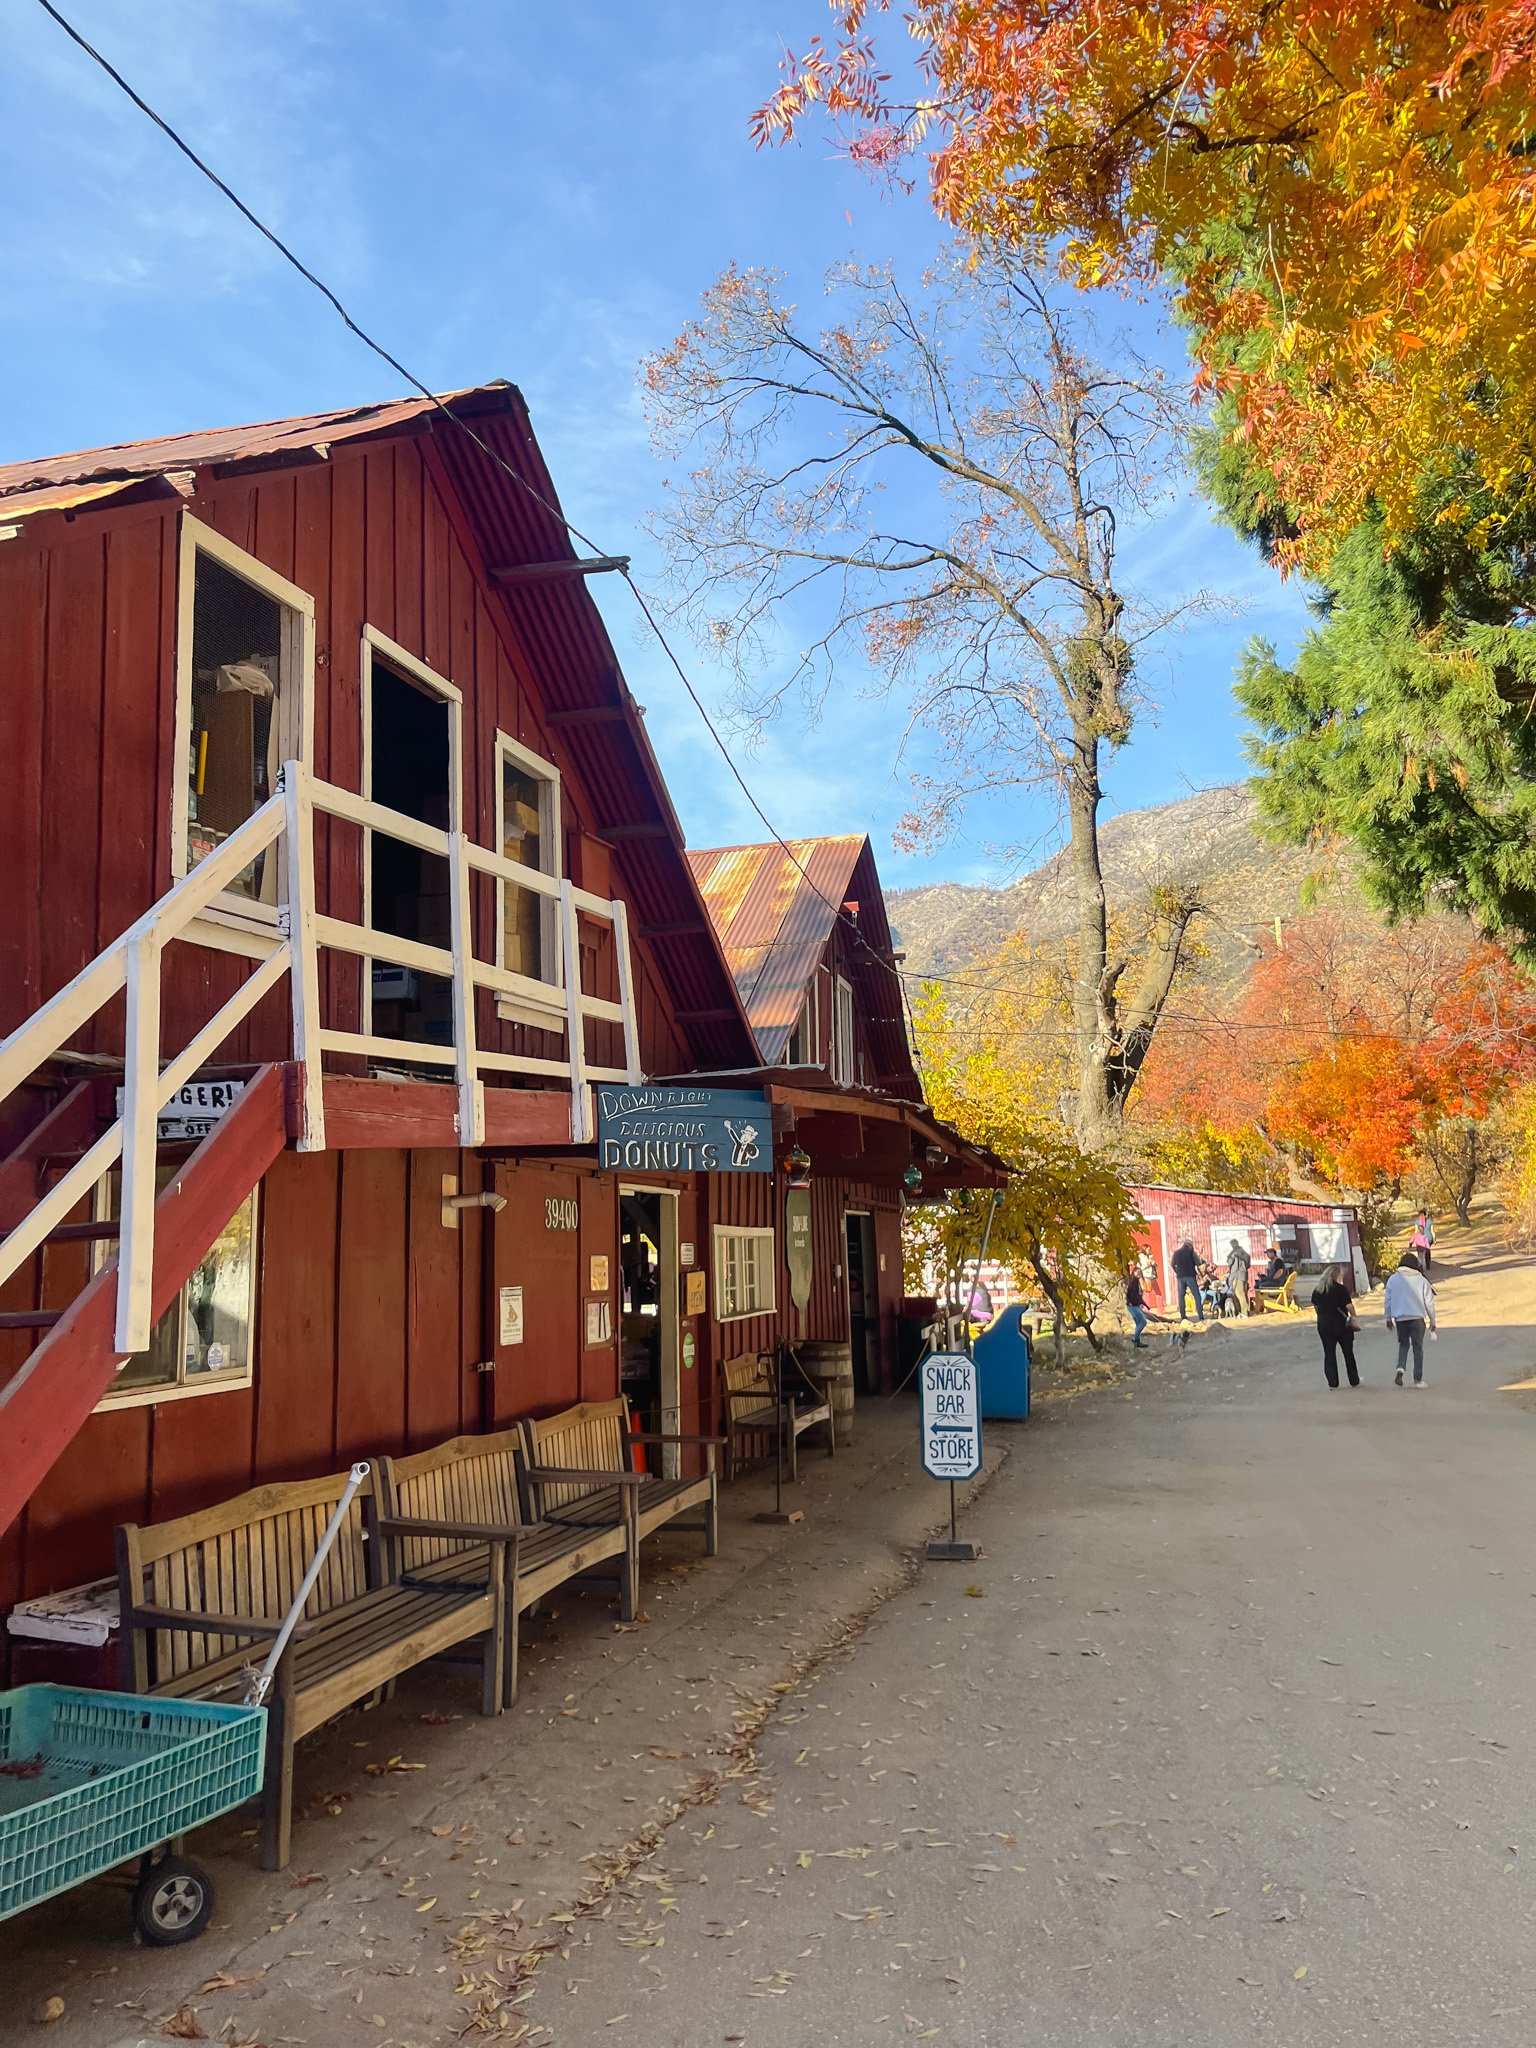 A Day Trip to Oak Glen (from Los Angeles) A Detailed Itinerary